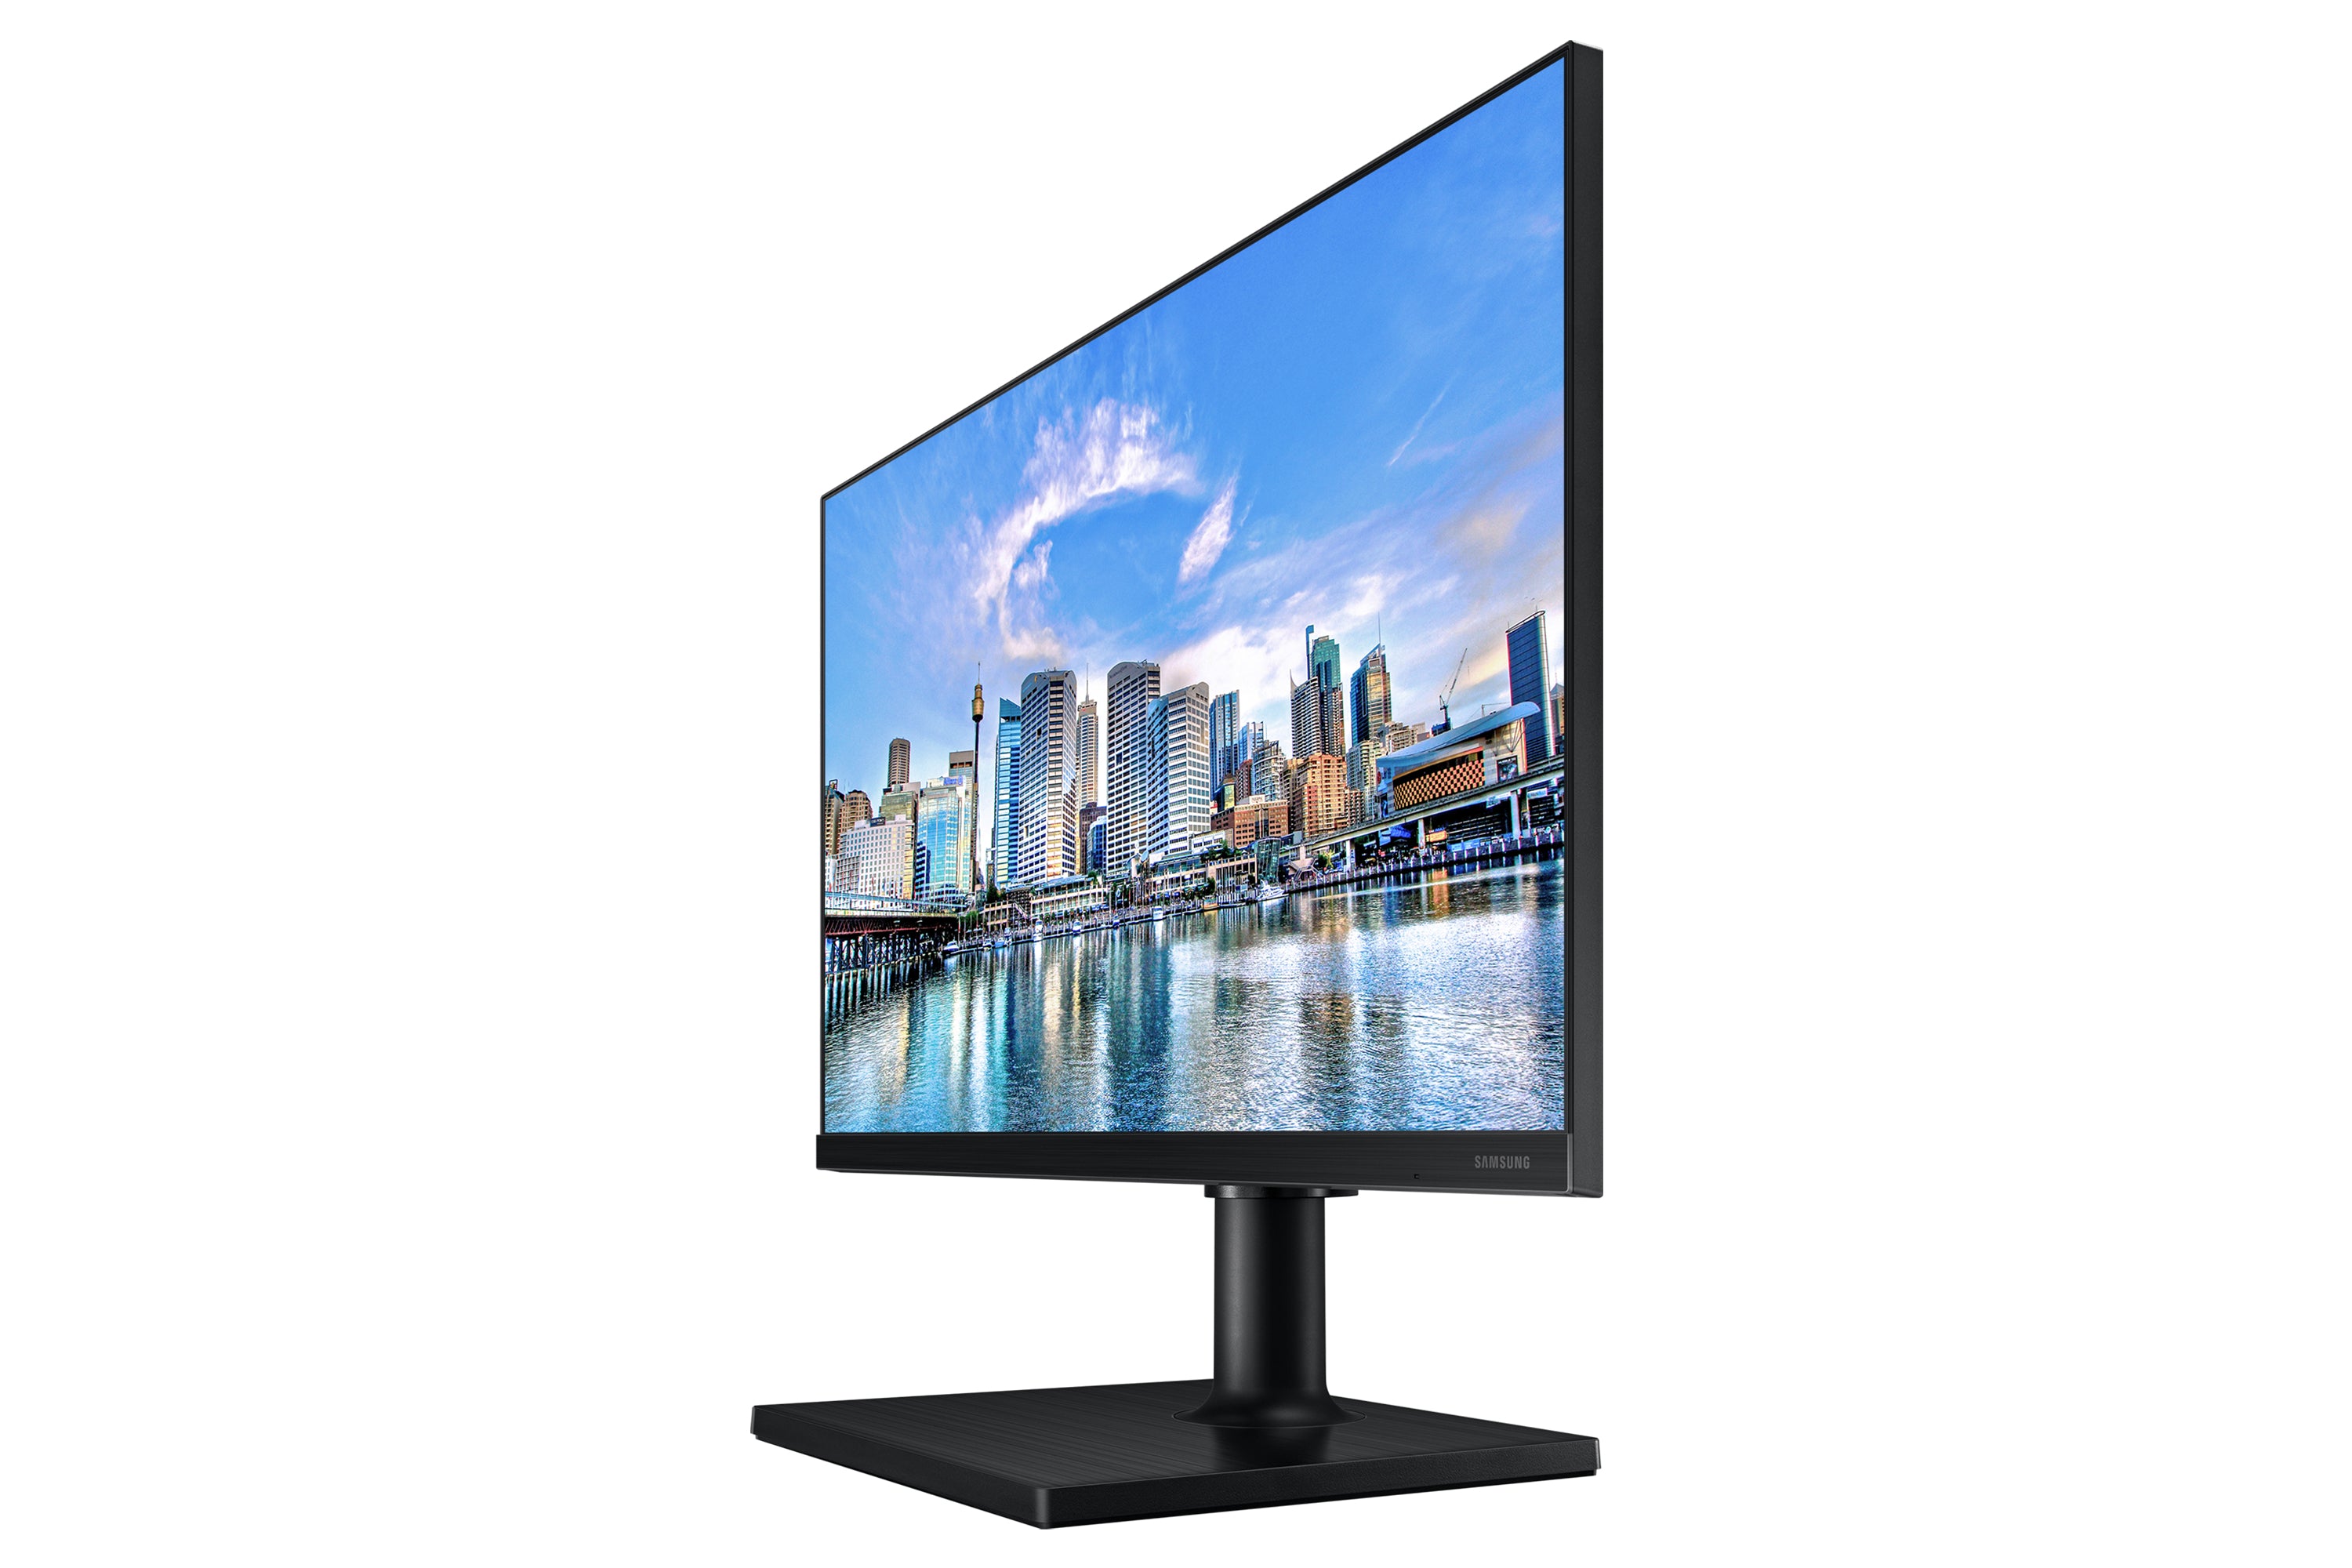 SAMSUNG F24T450F 23,8" 16:9, 1920X1080 IPS,5MS, HAS,  HDMI*2/DP,  HDMI CABLE.